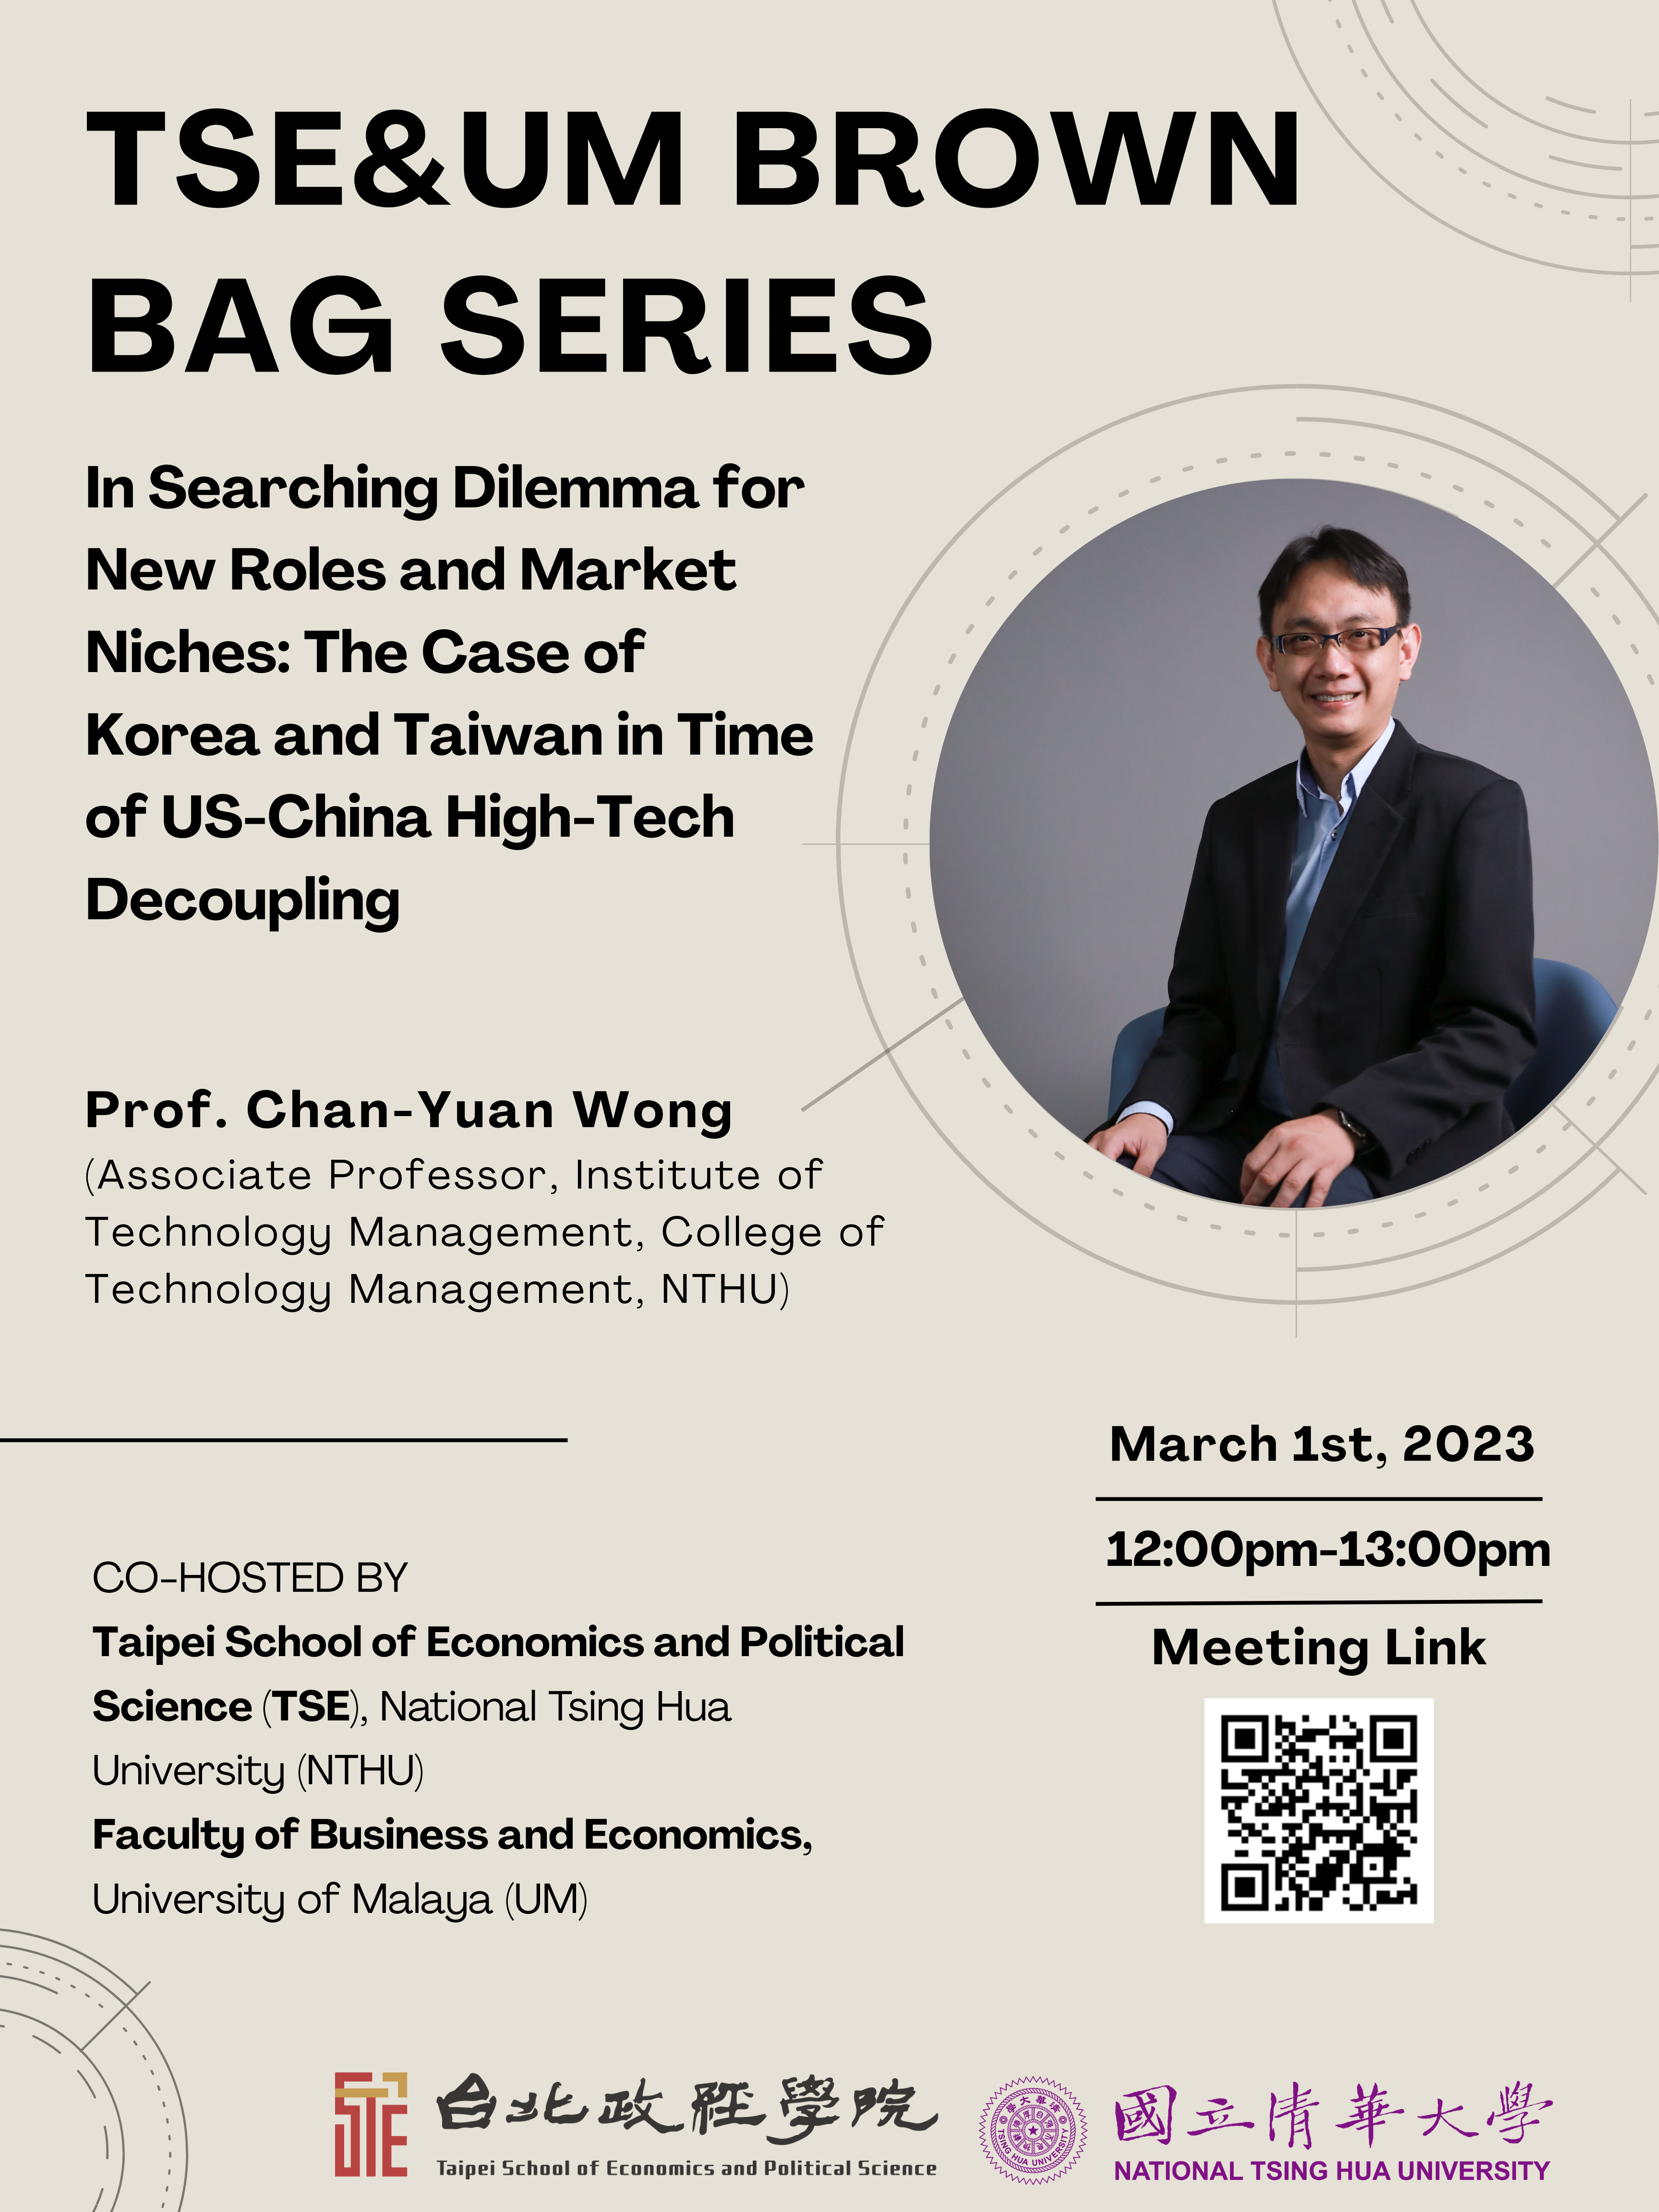 Brown Bag Series: March 1st "In Searching Dilemma for New Roles and Market Niches: The Case of Korea and Taiwan in Time of US-China High-Tech Decoupling"